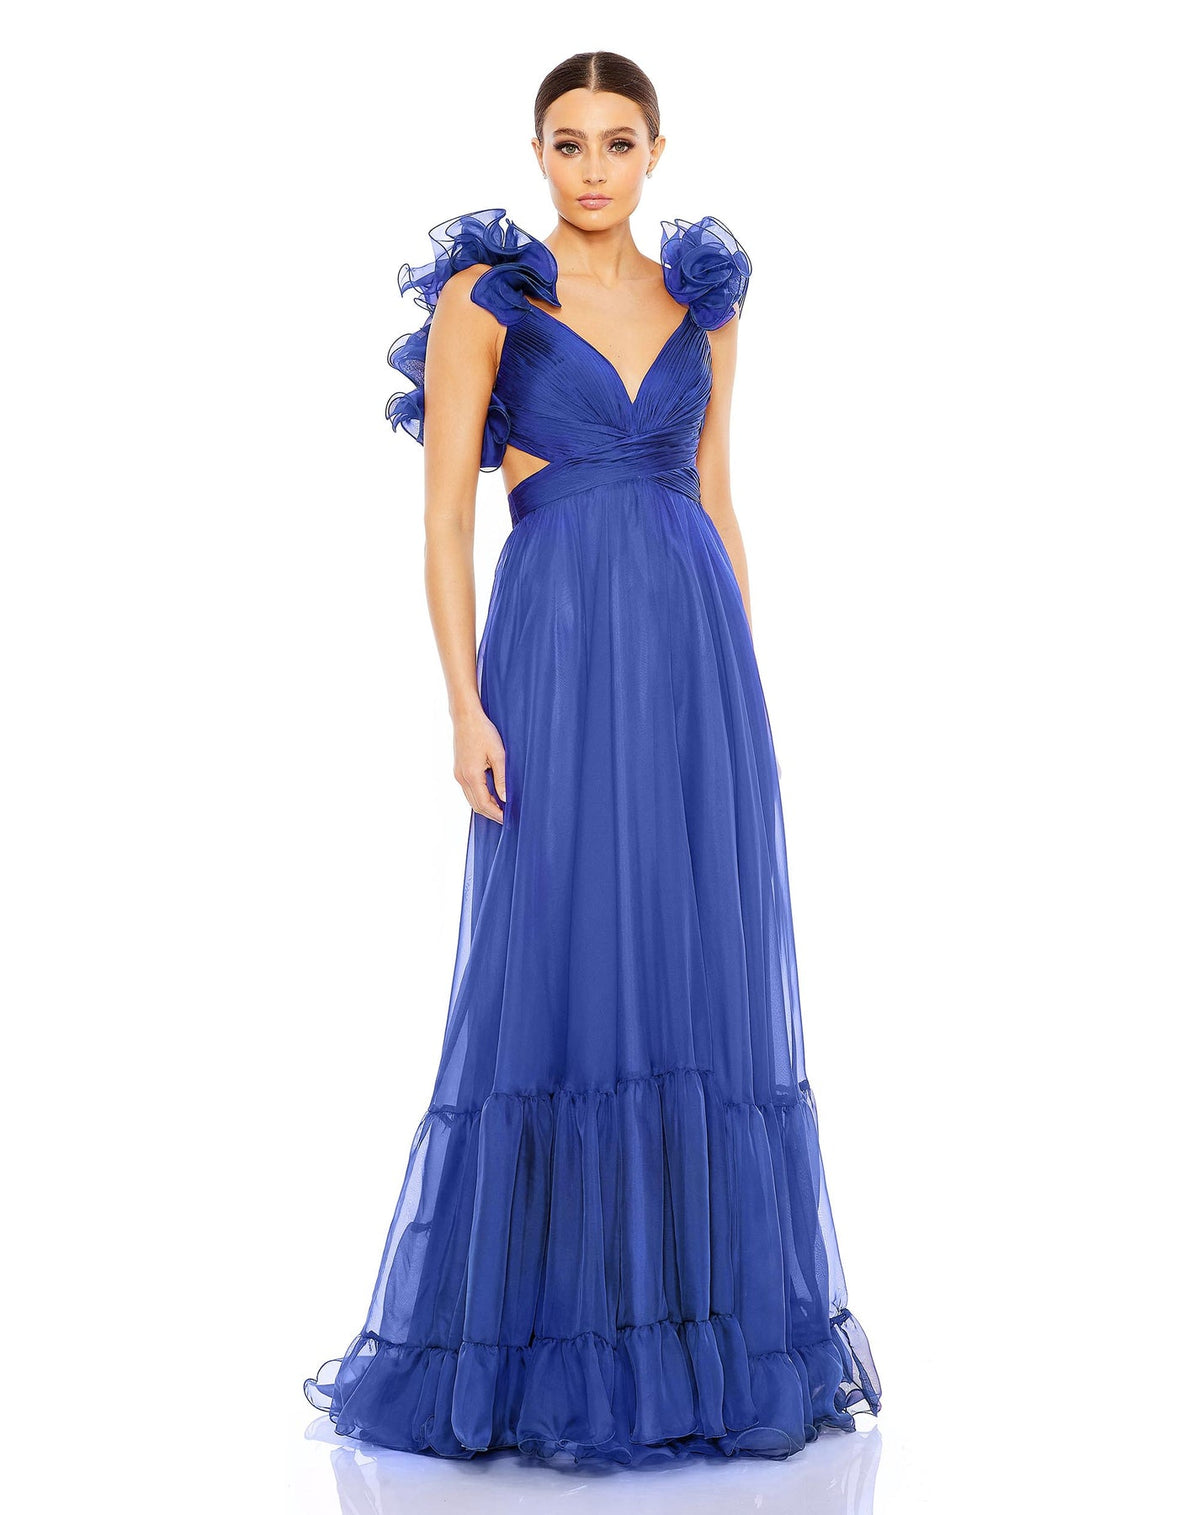 Ruffle tiered floral cut-out chiffon gown - Cobalt